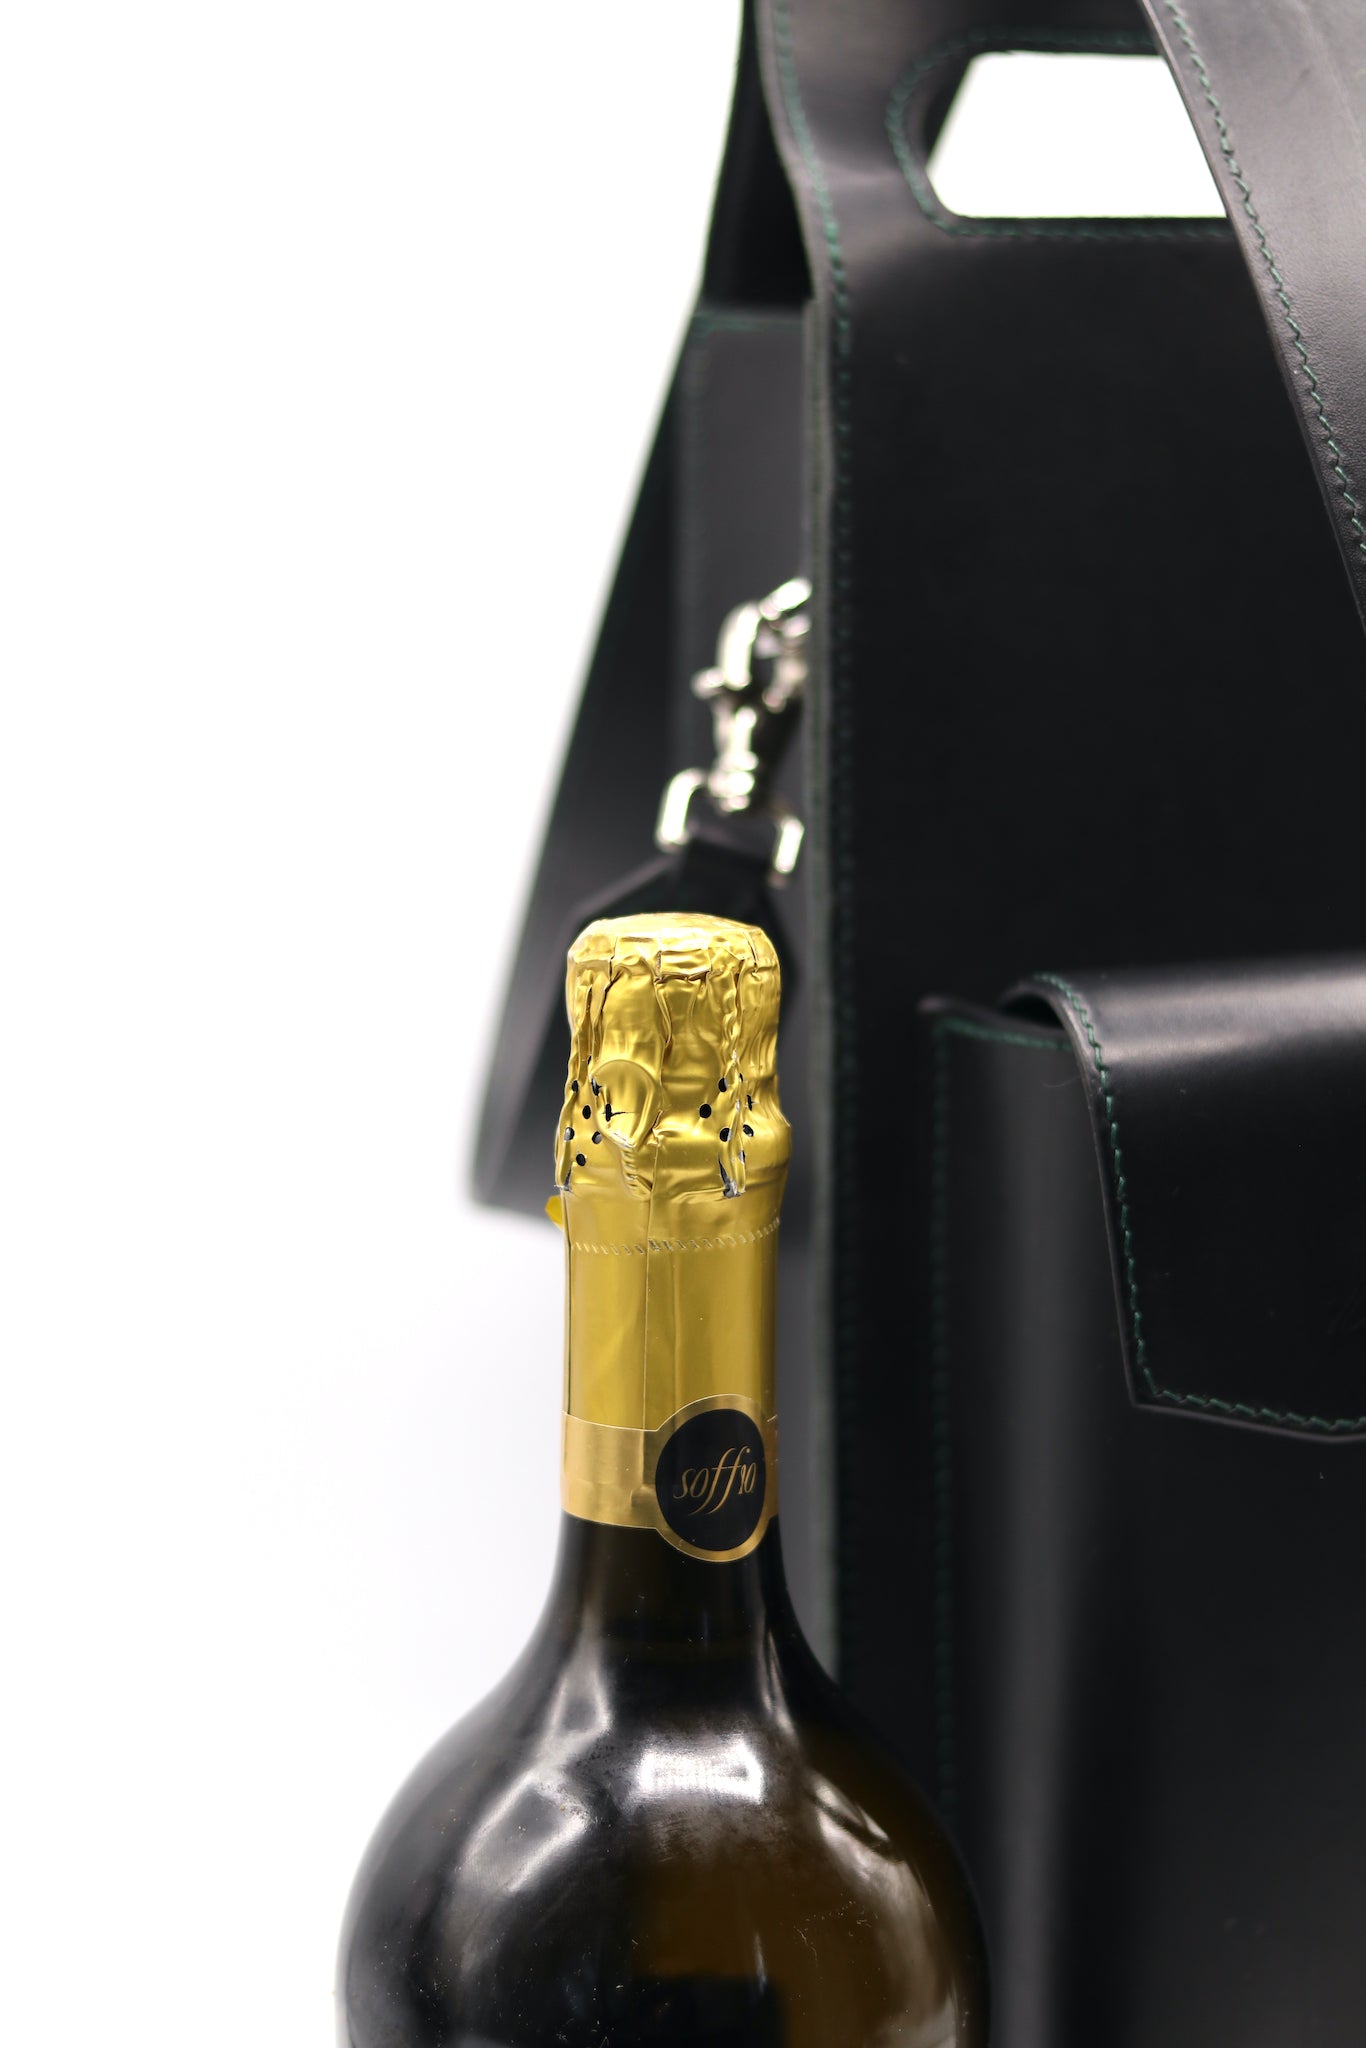 Detail of Stitching and Hardware on Tort Bespoke Leather Wine Bottle Bag